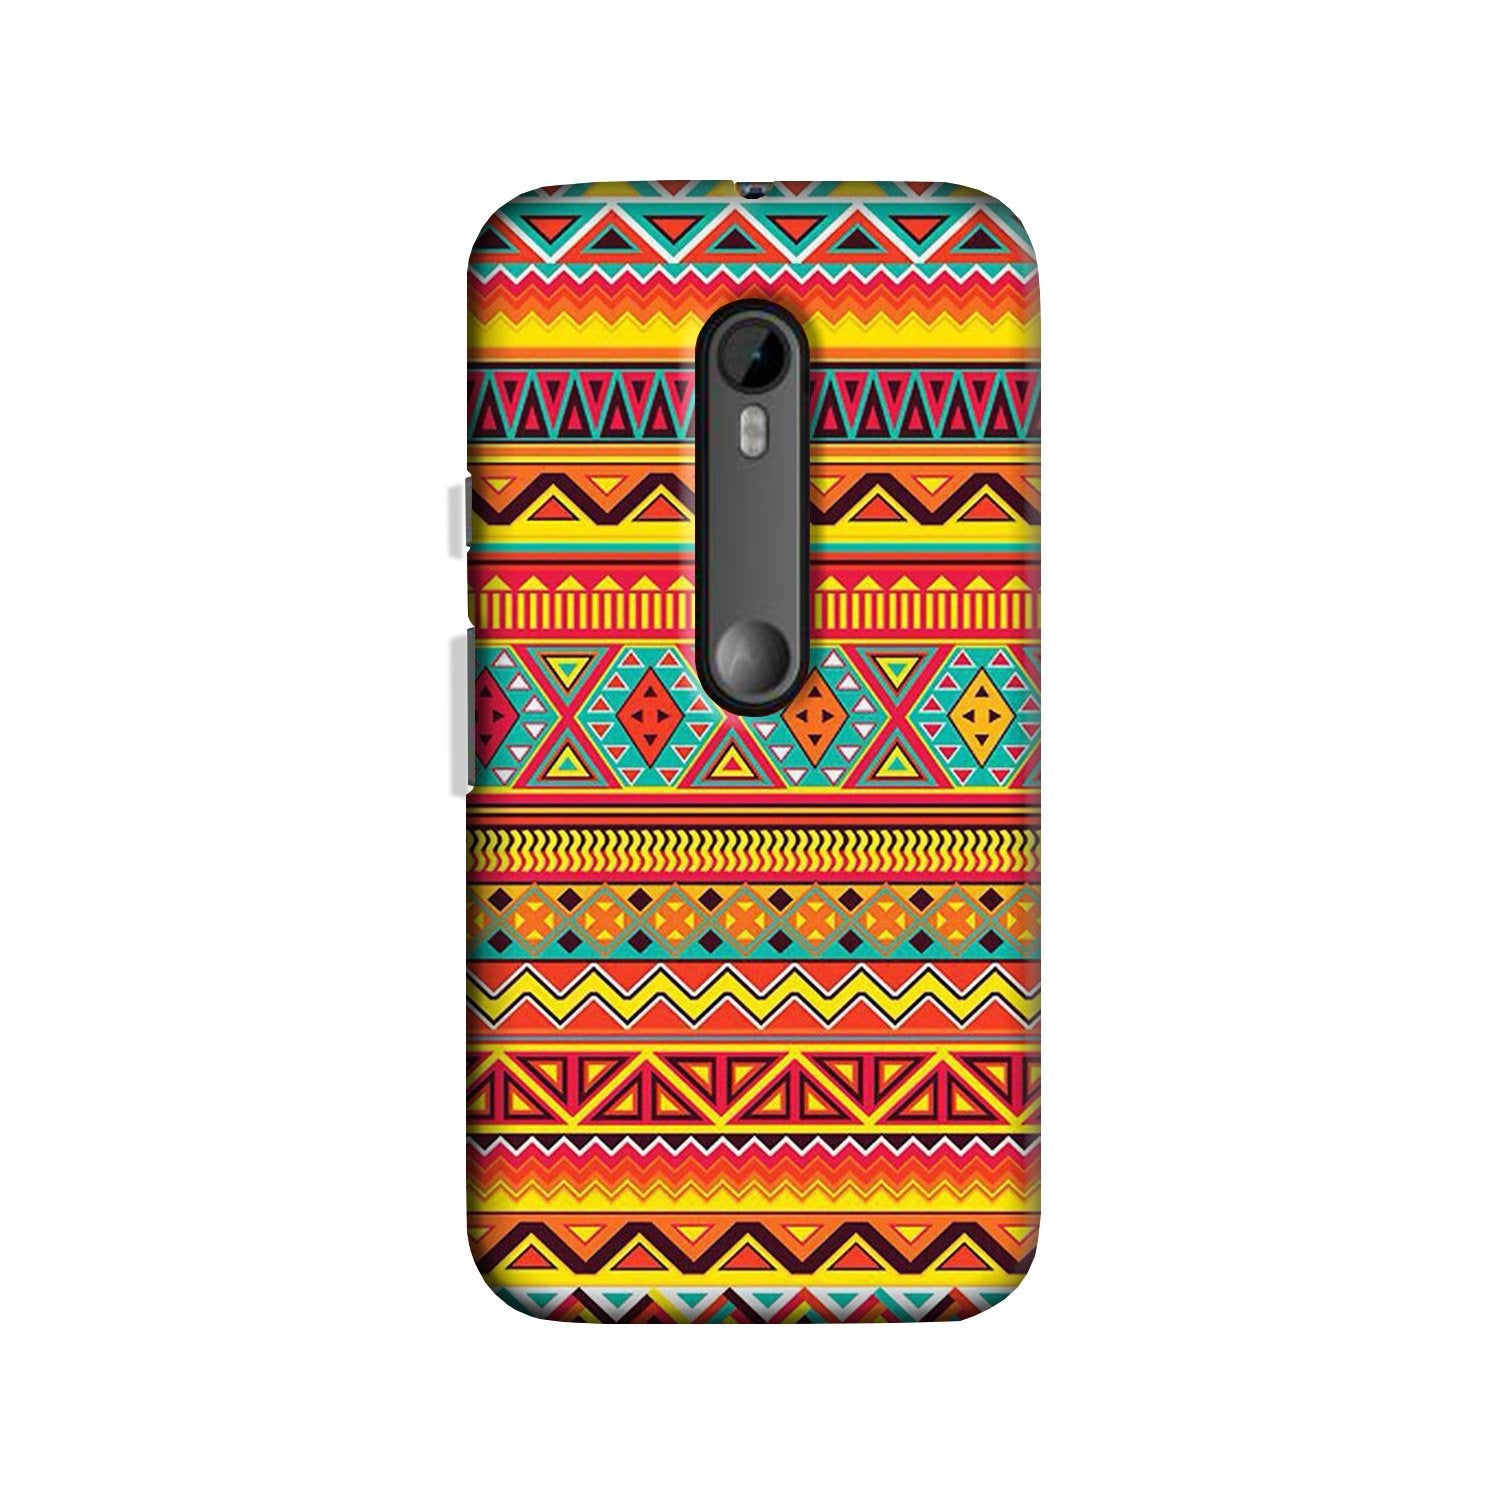 Zigzag line pattern Case for Moto X Play